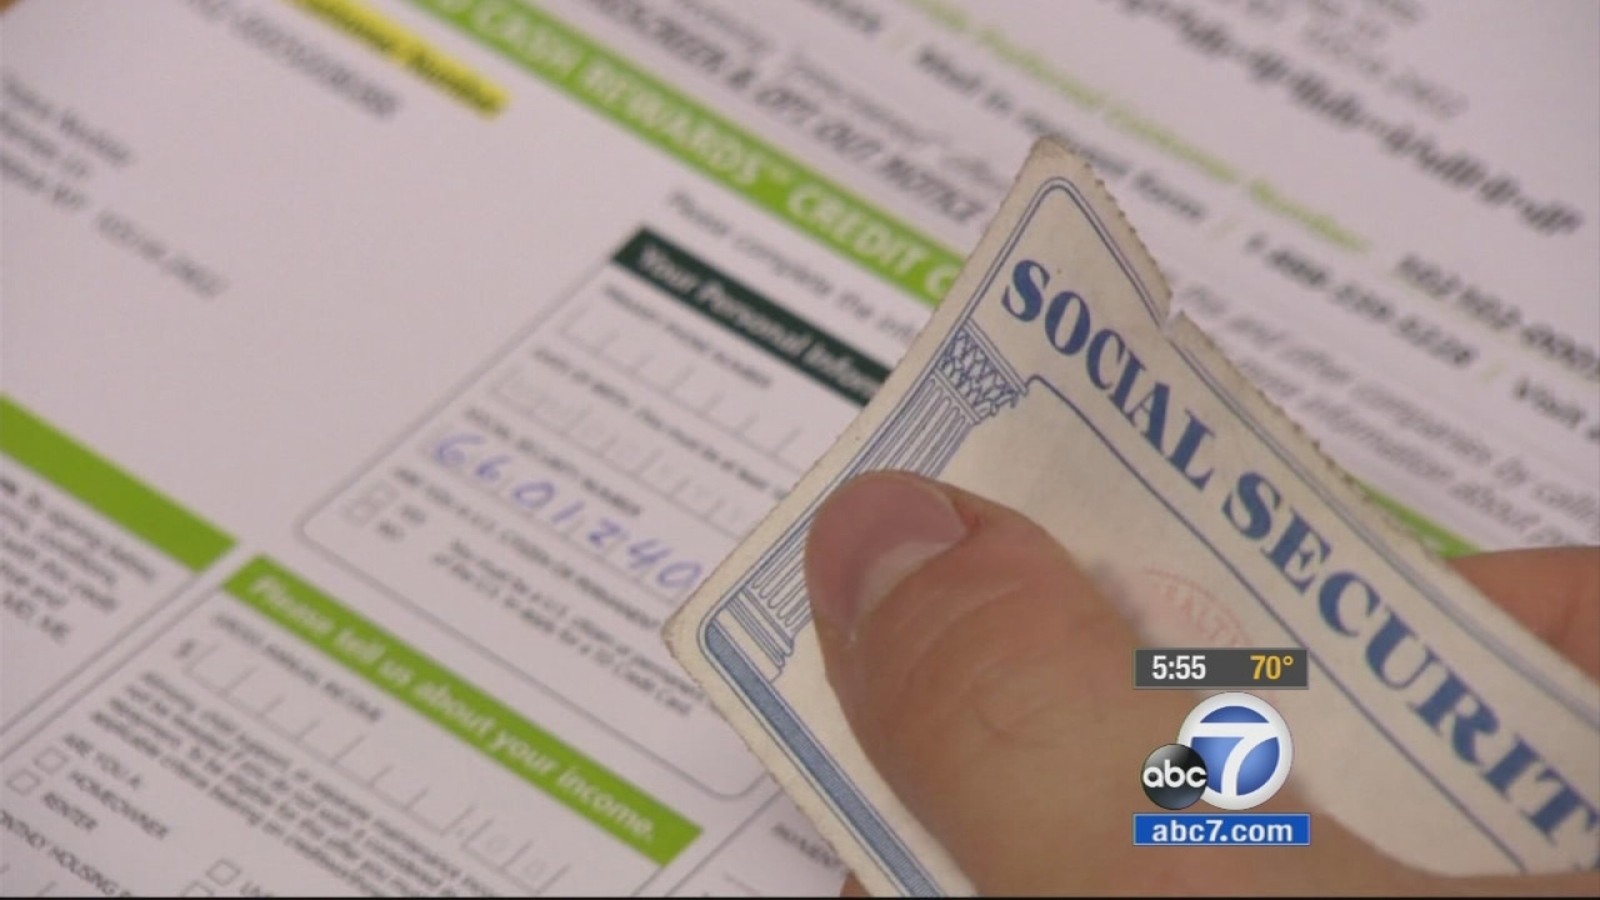 How To Send Social Security Number Safely